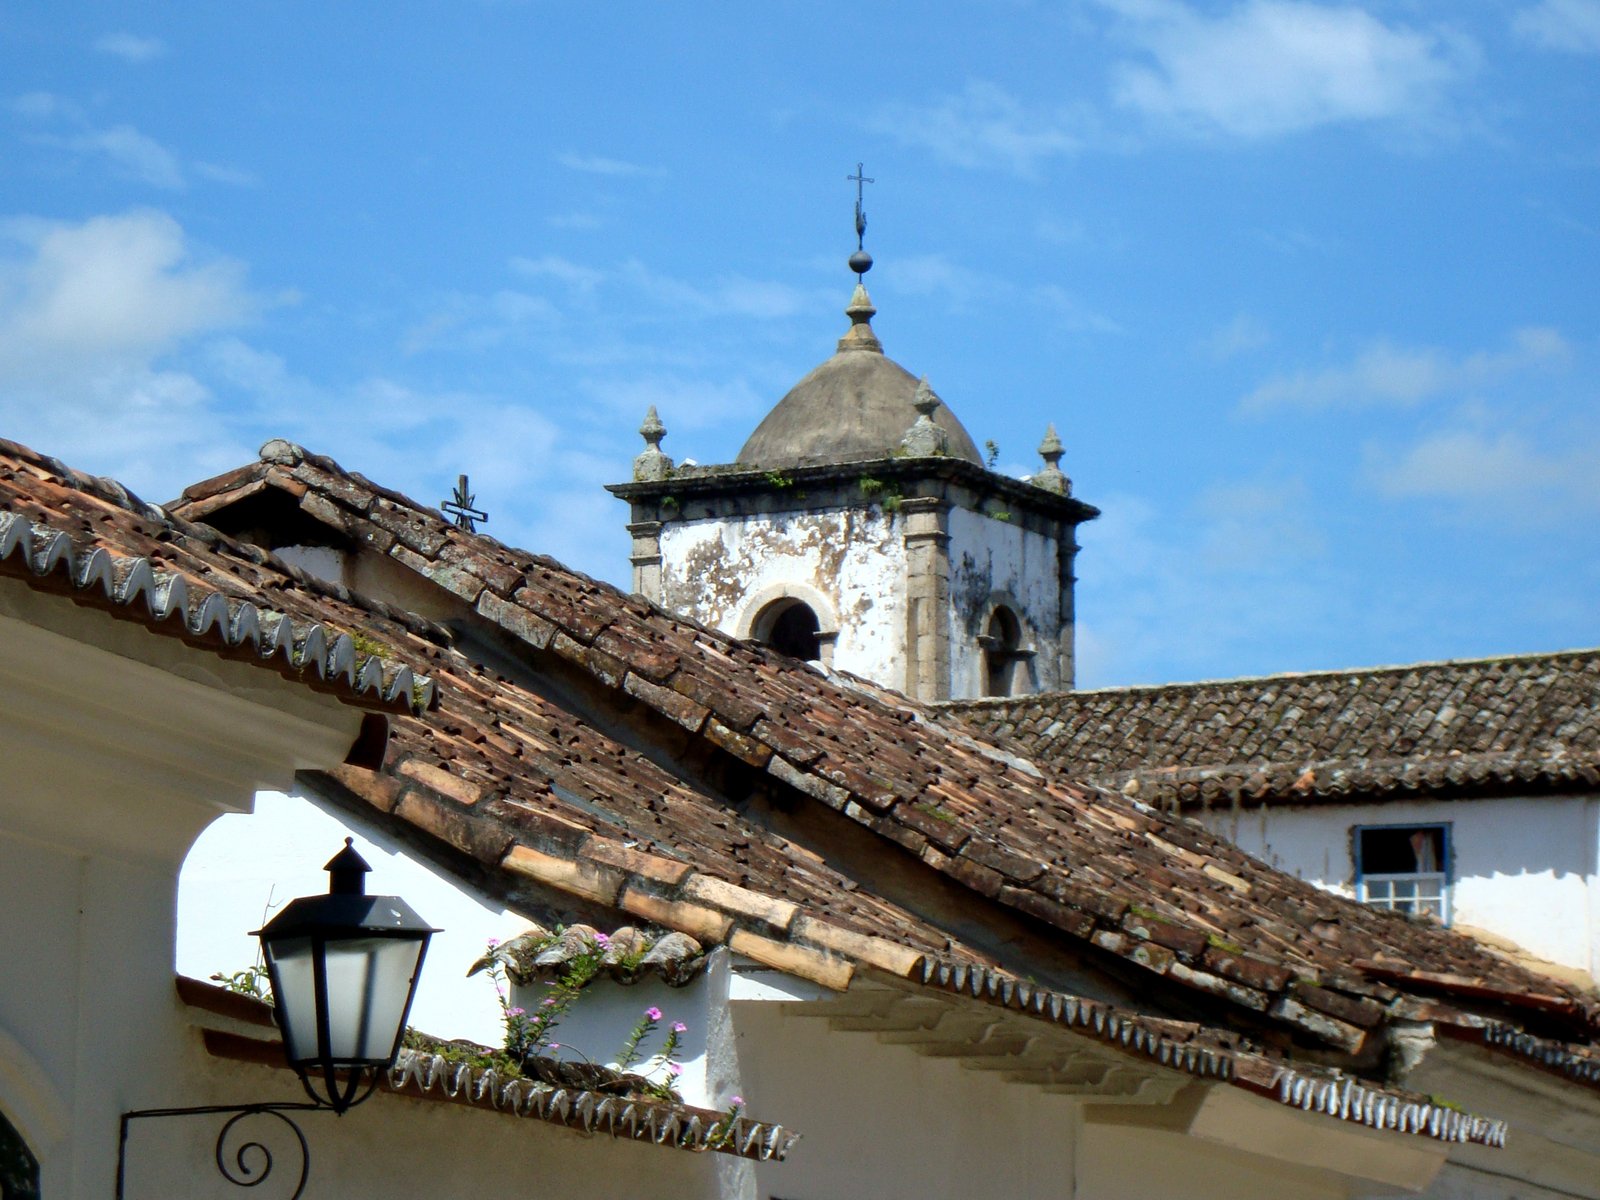 the top of an old building with tiled roof